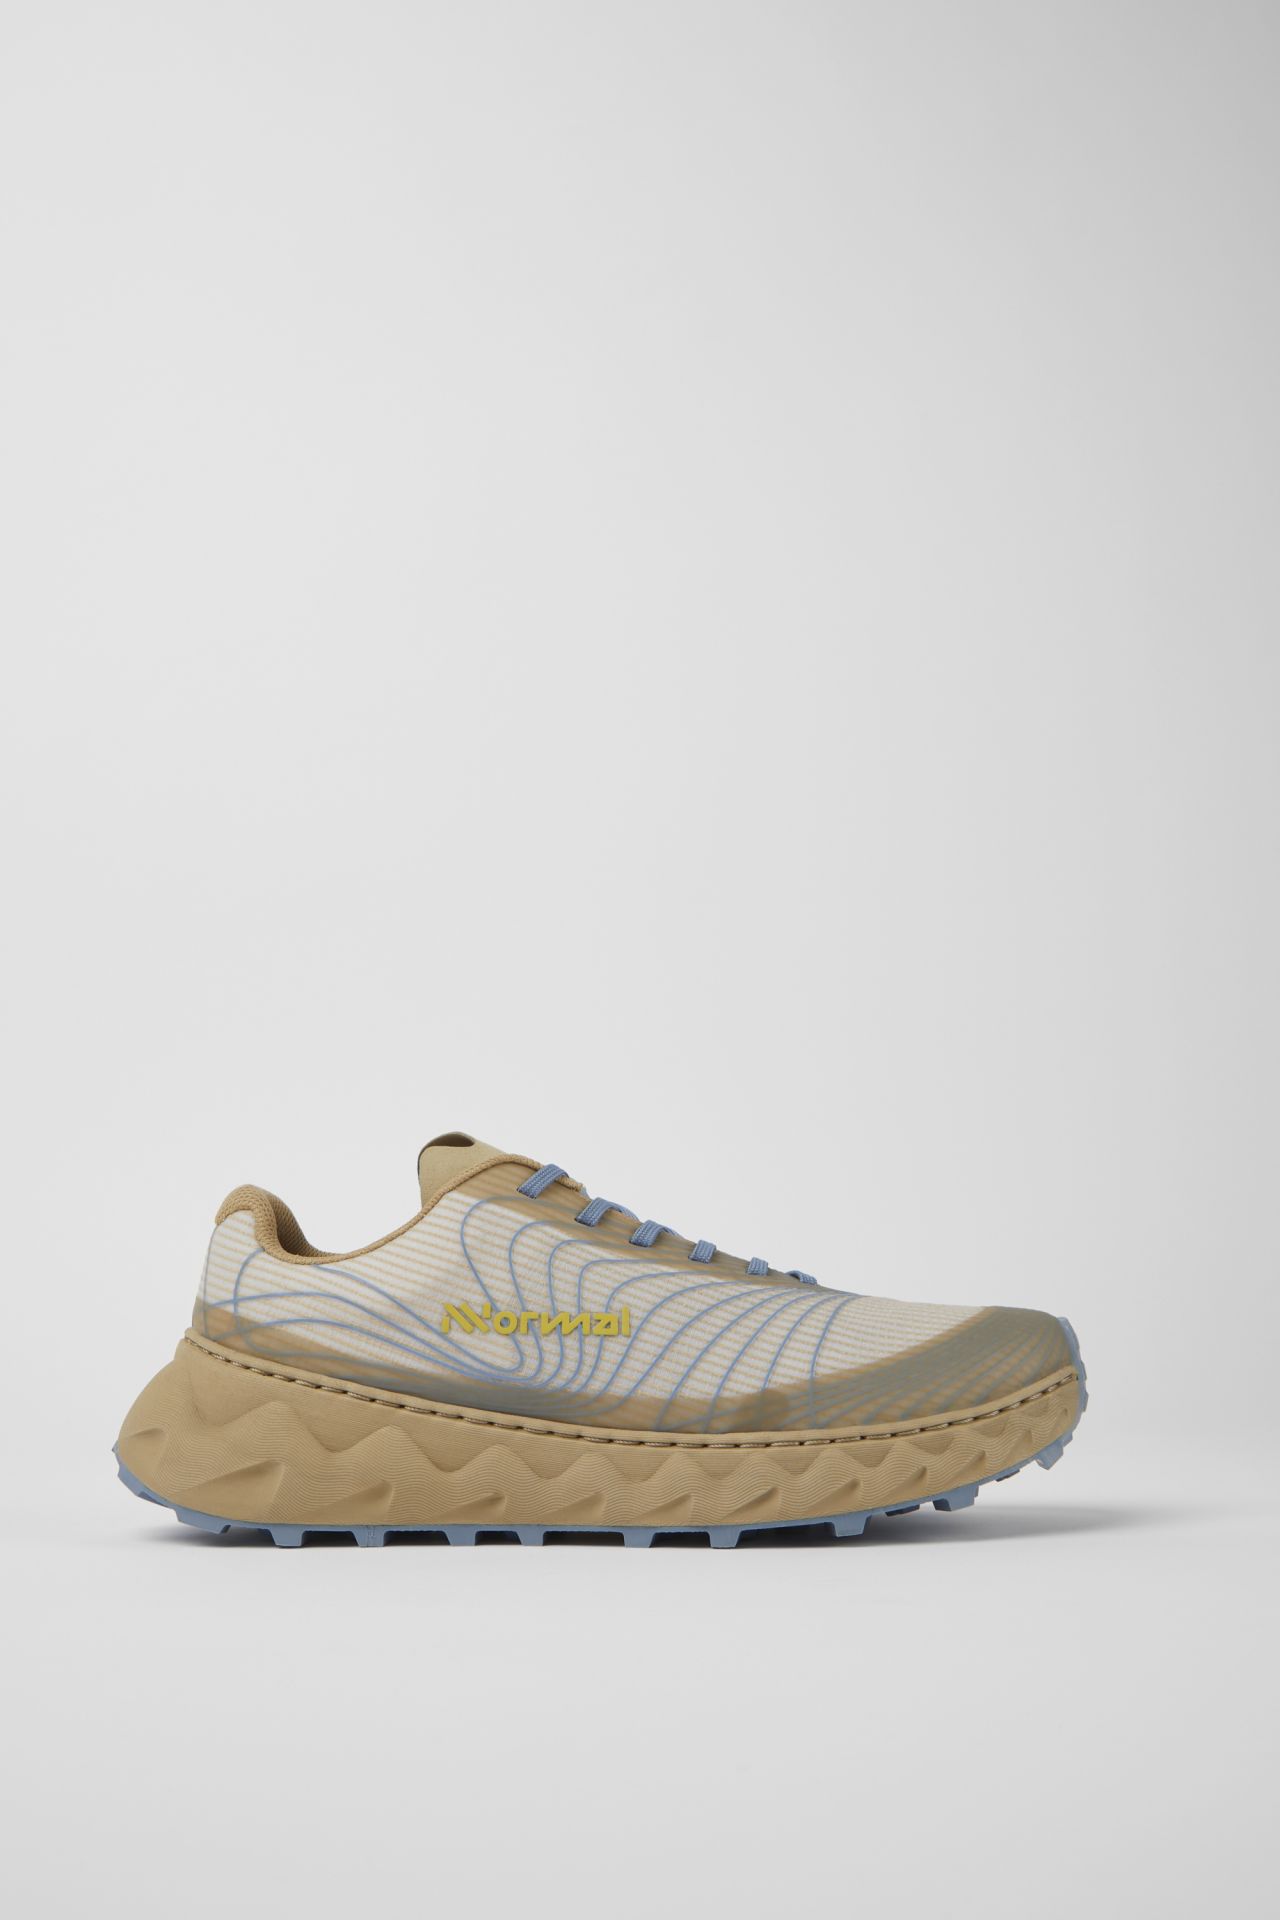 NNORMAL TOMIR SAND Chaussures de trail